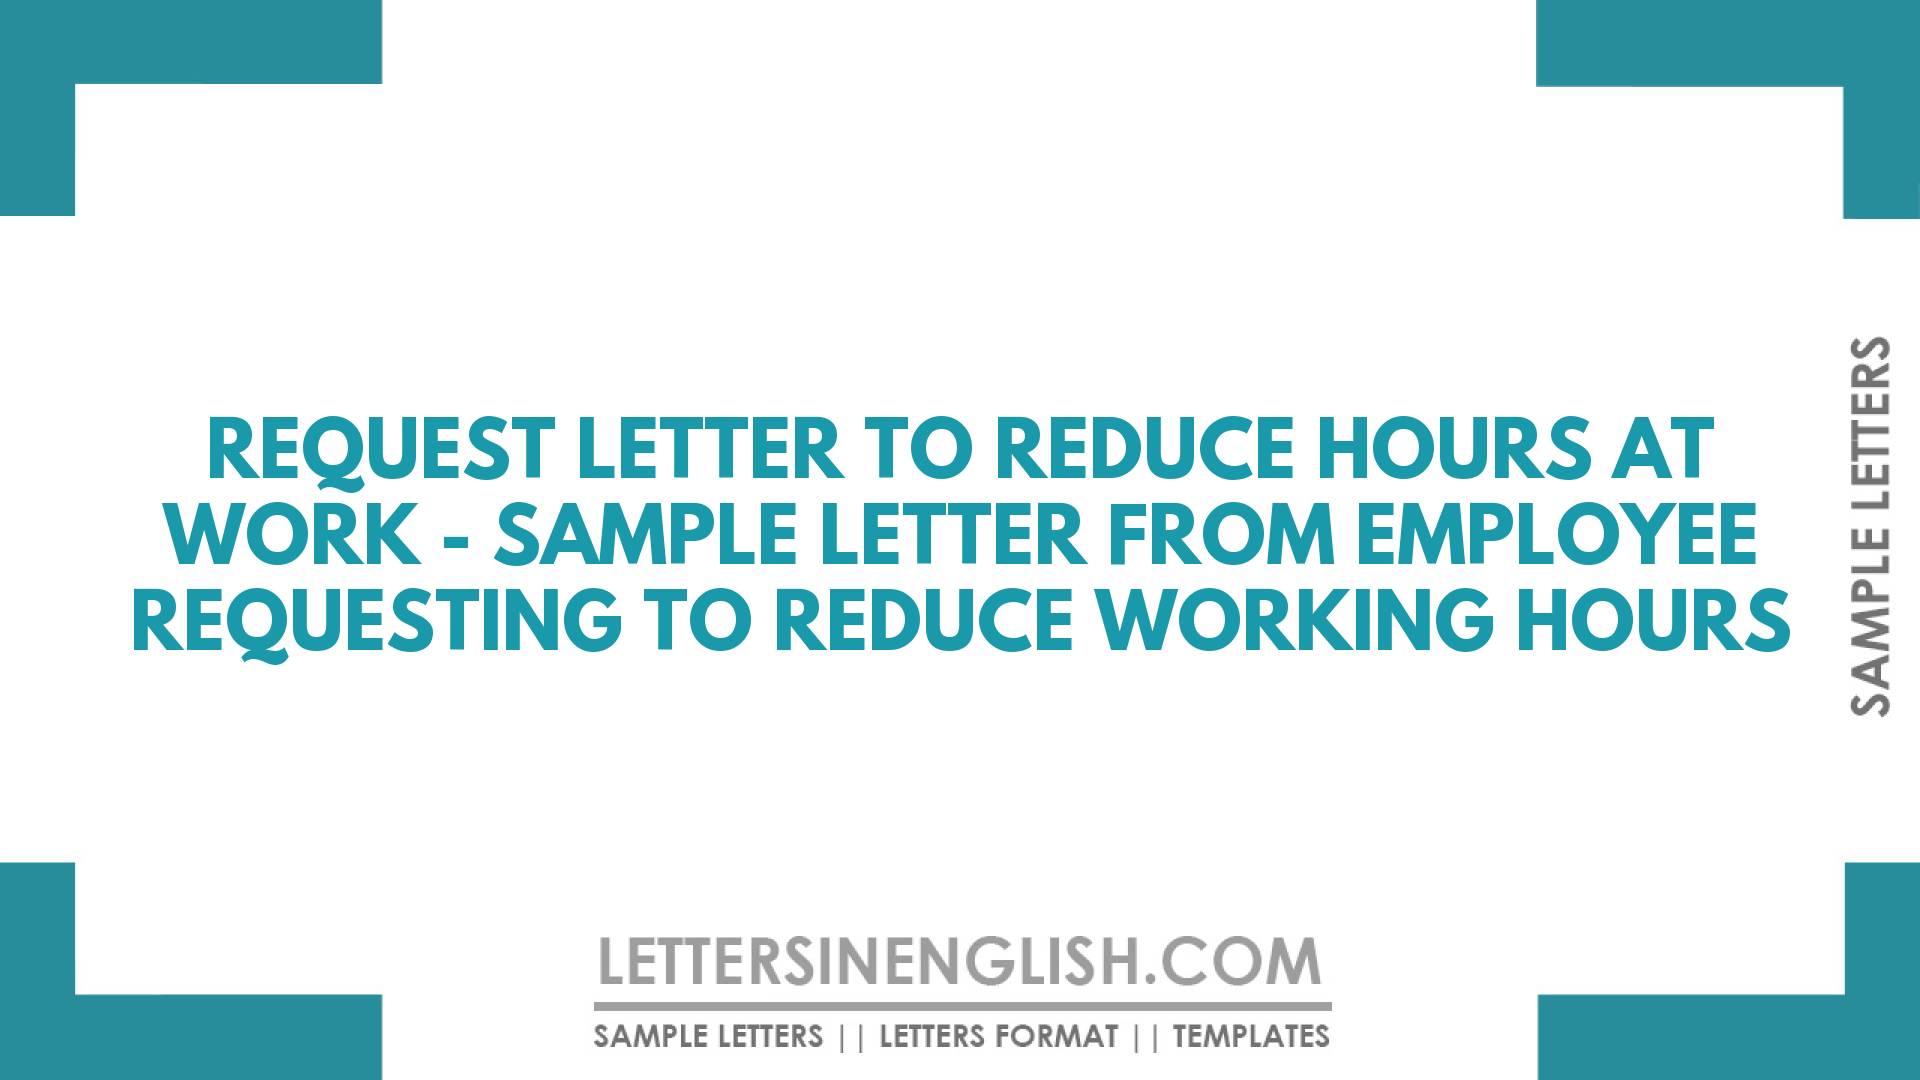 Request Letter to Reduce Hours at Work – Sample Letter from Employee Requesting to Reduce Working Hours